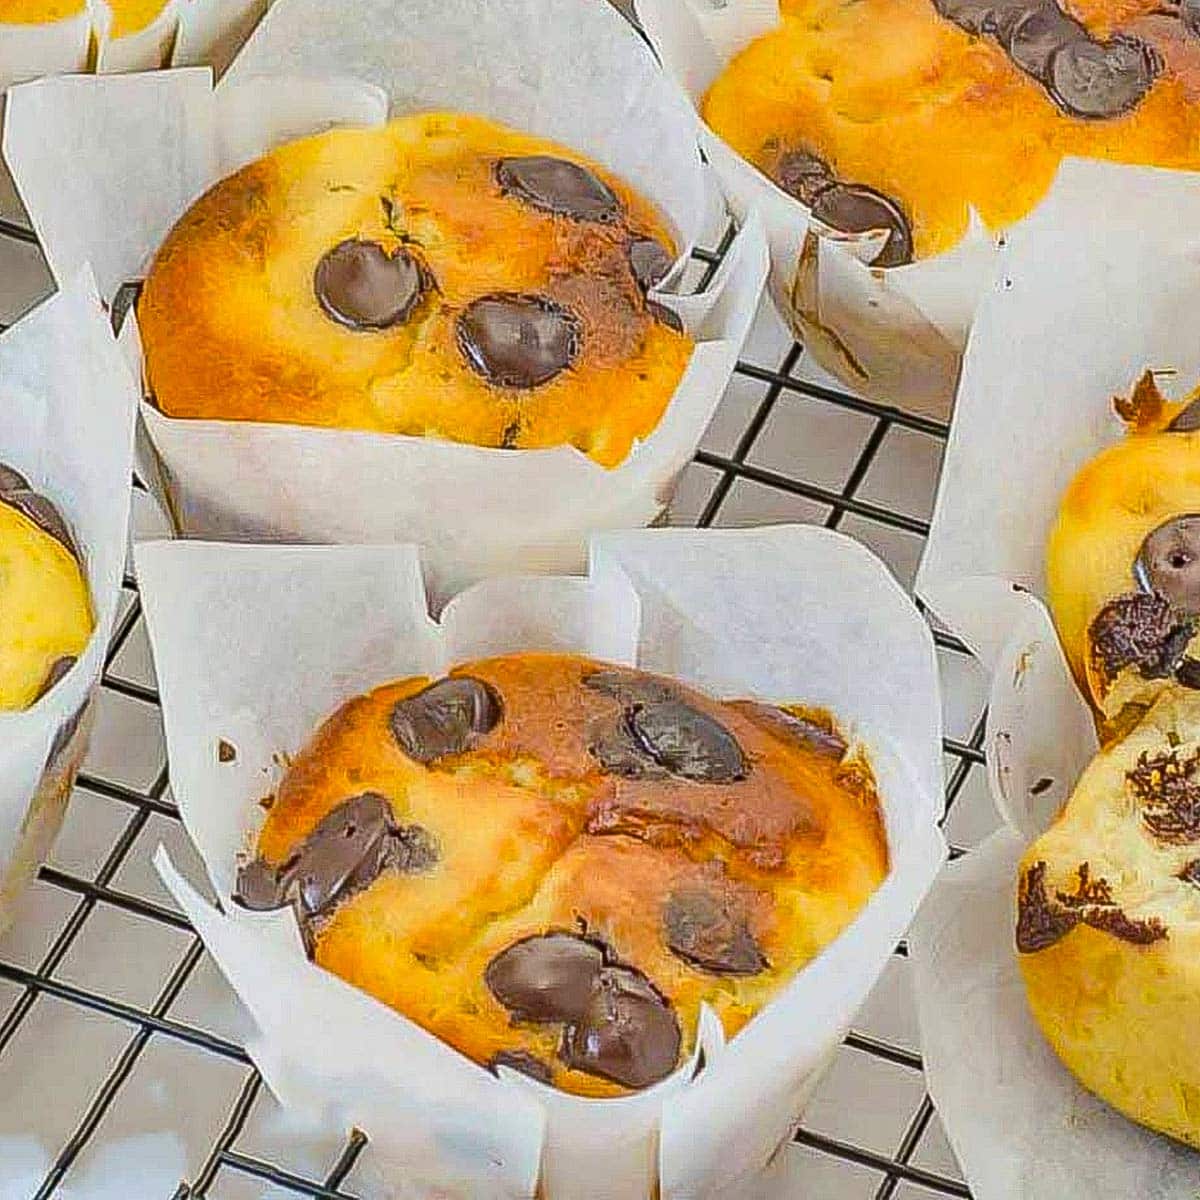 Keto chocolate chip muffins on a cooling rack.